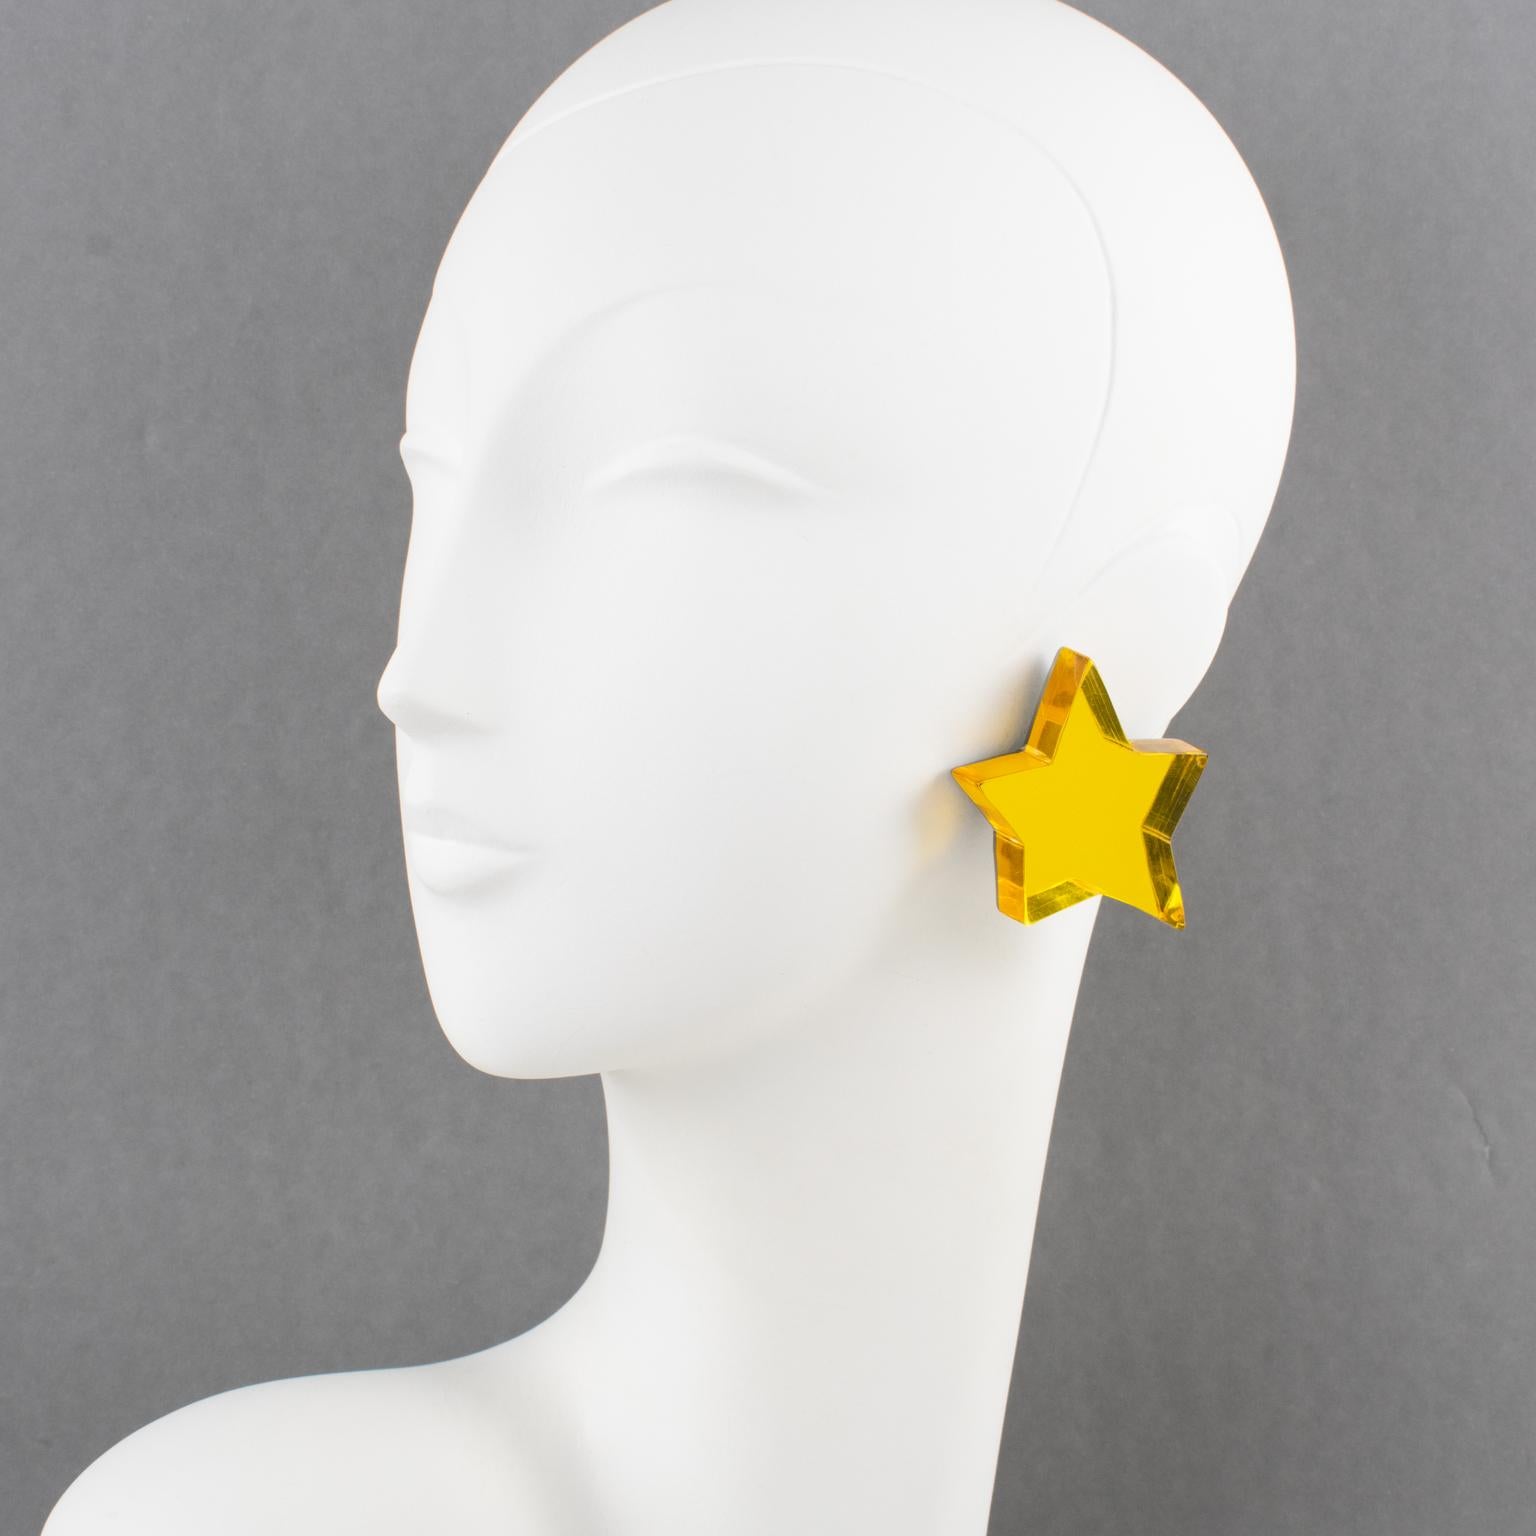 Harriet Bauknight for Kaso designed those stunning oversized Lucite clip-on earrings in the 1980s. The star shape features a dimensional layer with a bright yellow mirror texture pattern. The intense color is achieved with a multilayer lamination